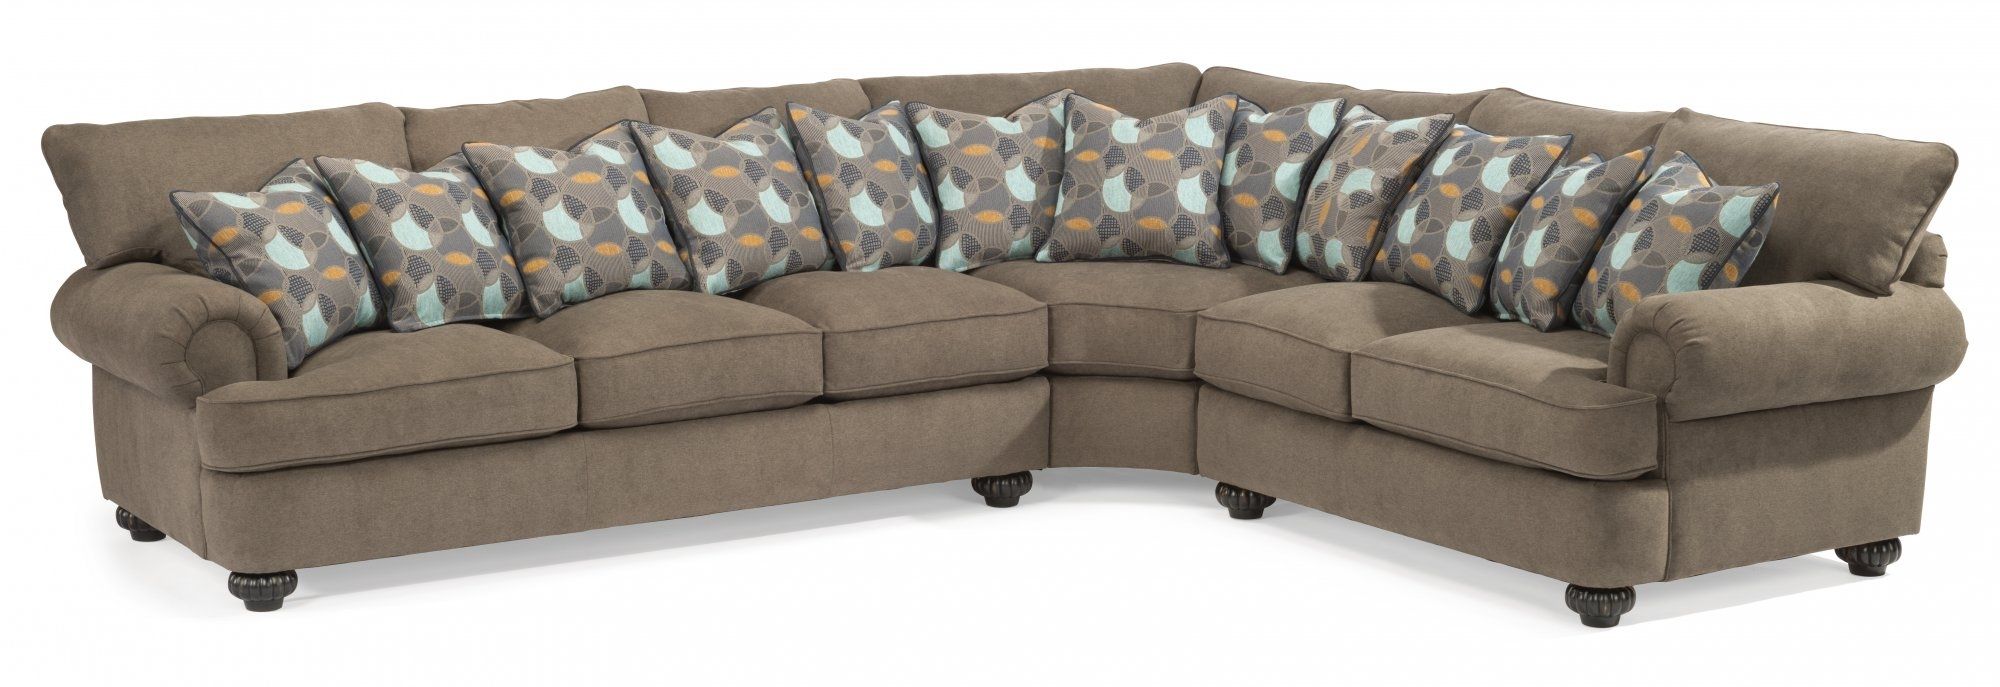 Sectional Sofa With Nailhead Trim Sectionals Best Decoration 15 Throughout Sectional Sofas With Nailhead Trim (View 9 of 10)